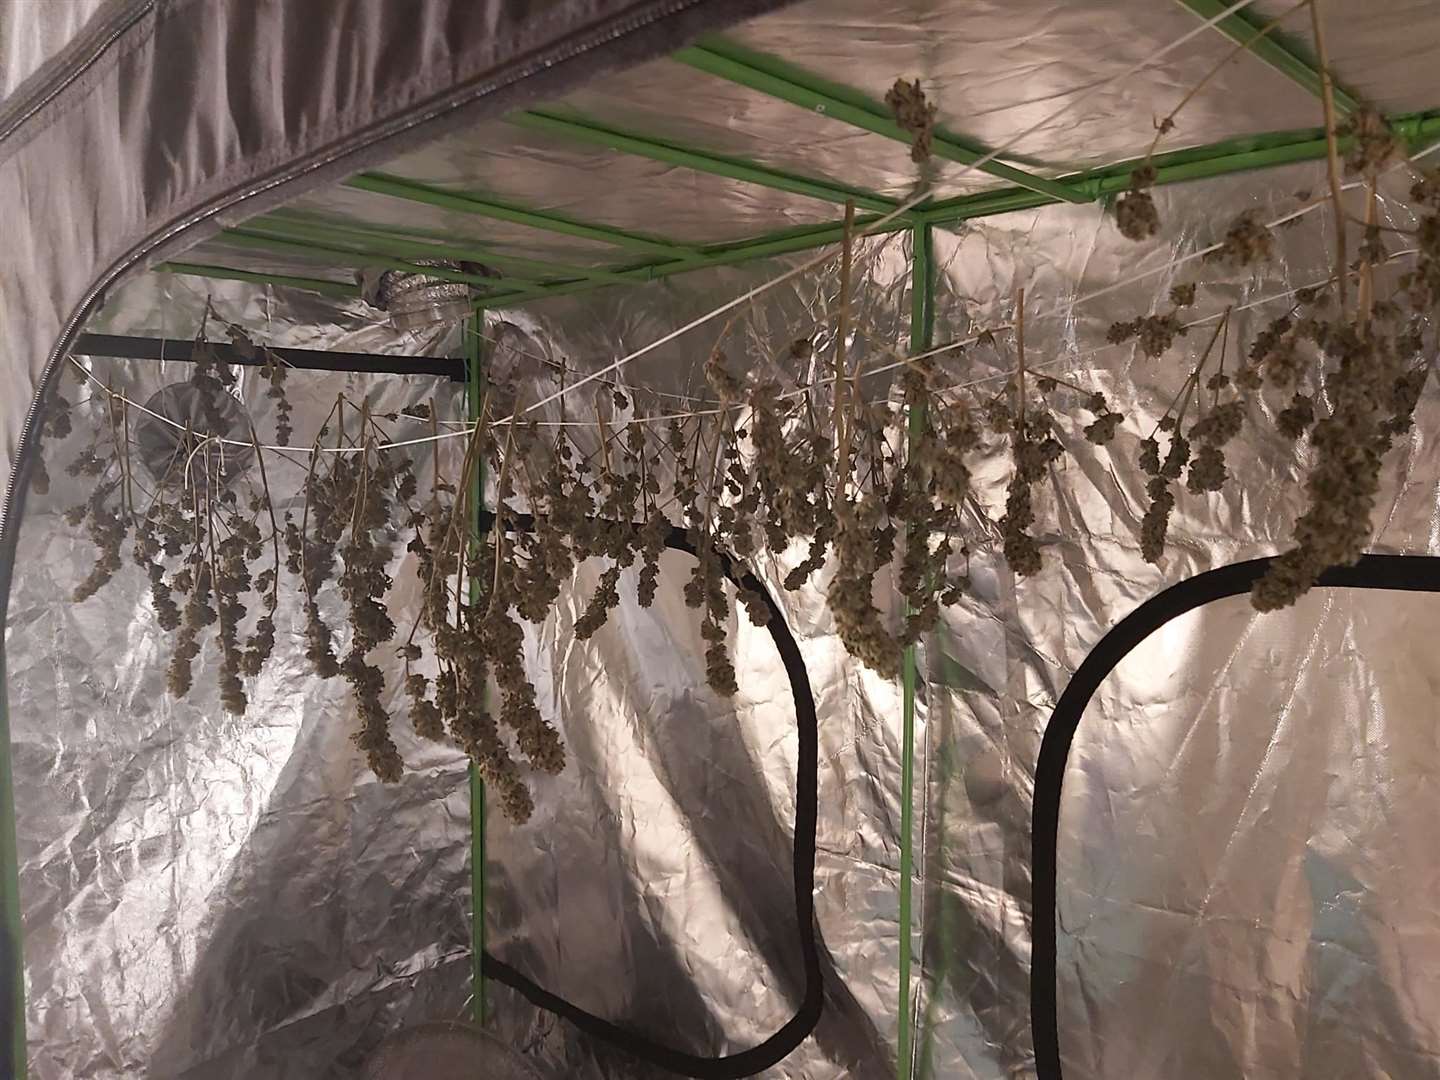 A cannabis farm was discovered in Ramsgate. Picture: Kent Police